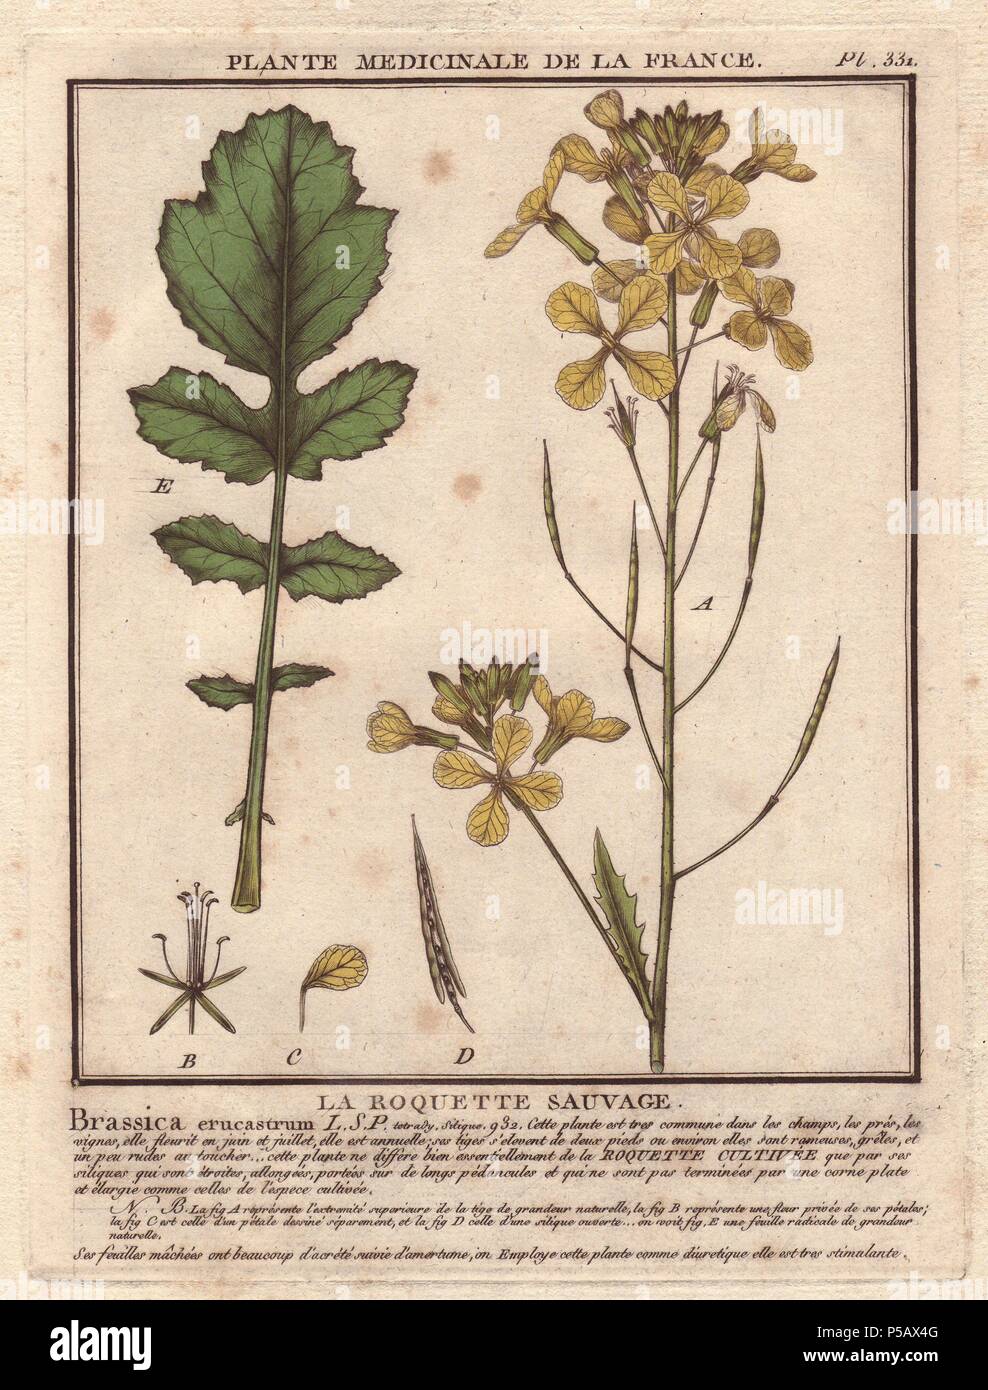 Wild rocket or arugula (Eruca sativa, Brassica eruca). . La roquette sauvage (Brassica erucastrum). . French botanist Jean Baptiste François Pierre Bulliard was born around 1742 at Aubepierre-en-Barrois (Haute Marne) and died on 26 September 1793 in Paris. He studied at Angers, and later illustrated and published a number of botanical and mycological works on French flora. He studied art and engraving under Francois Martinet, the celebrated artist of many of Buffon's natural history books. Stock Photo